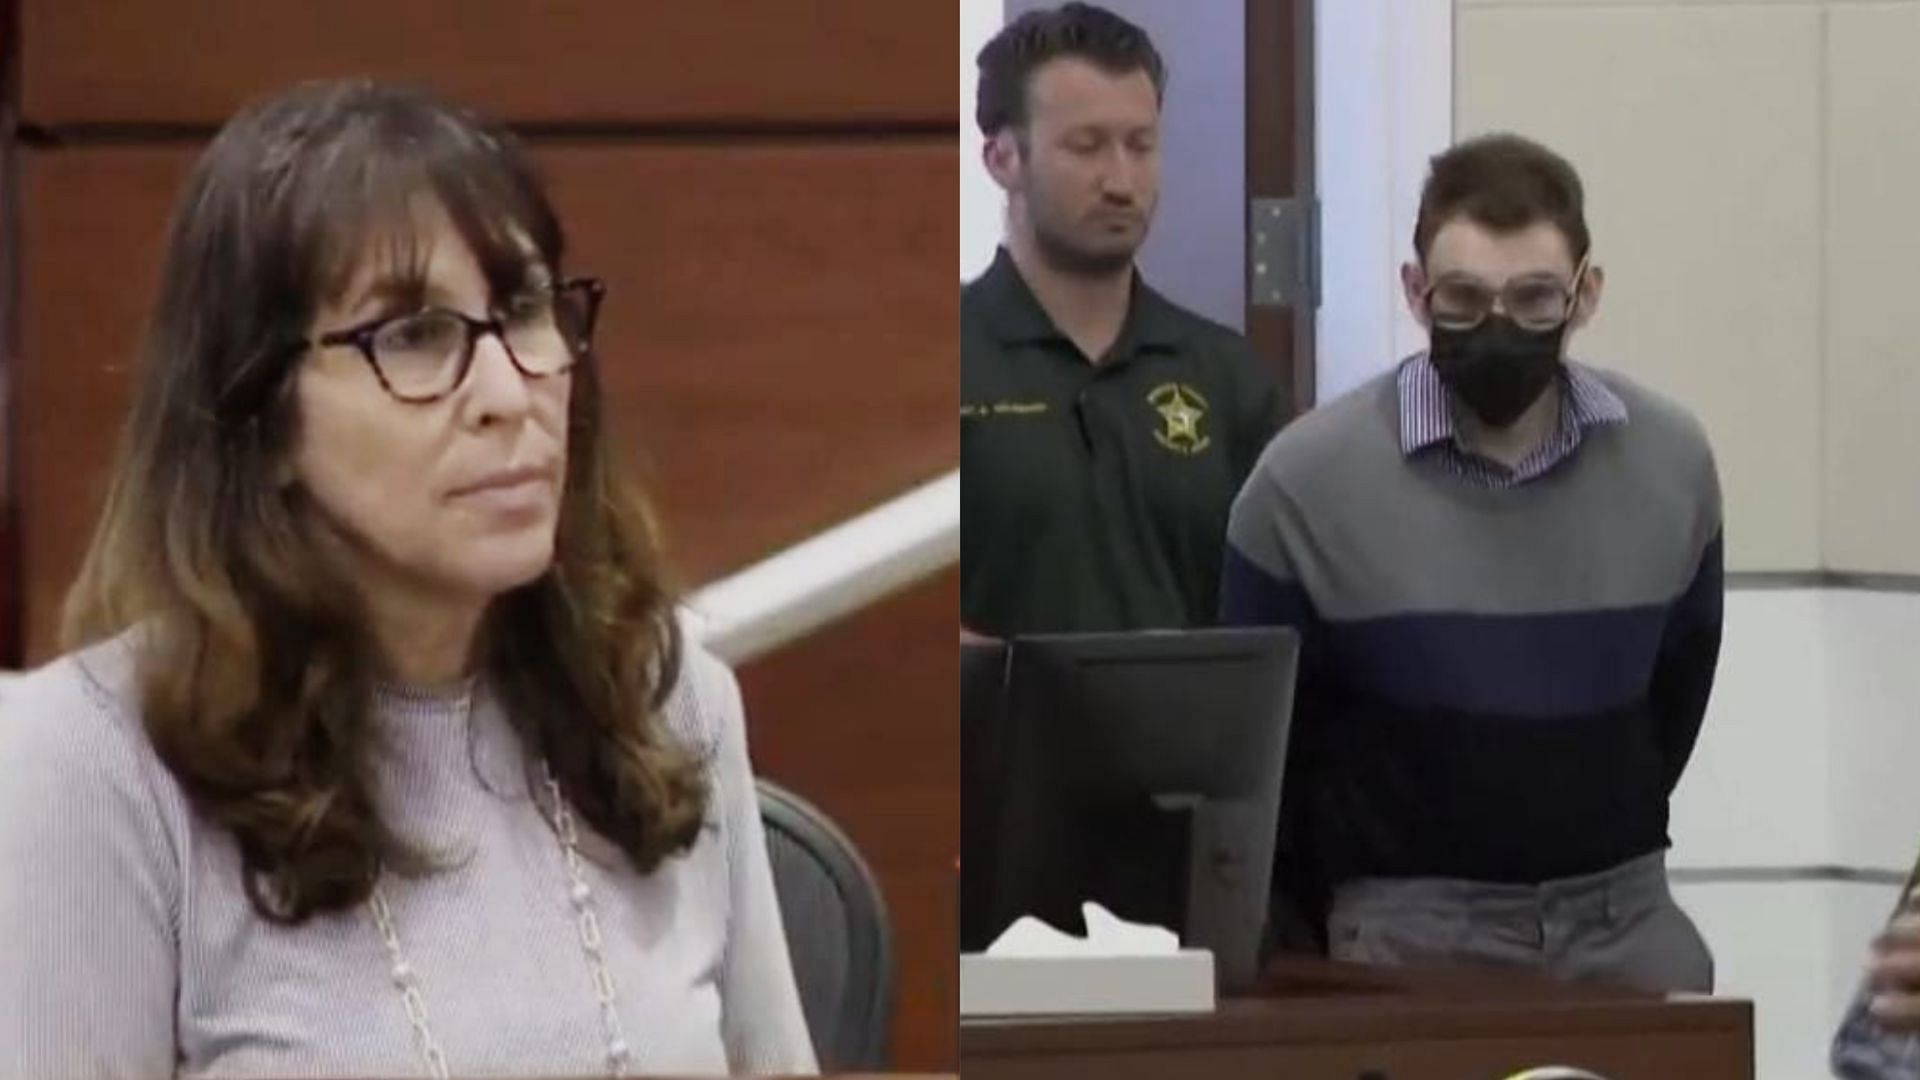 Ivy Schamis, former teacher and survivor of the 2018 Parkland school shooting, takes the stand as a witness (Images via CBS 12/Twitter)